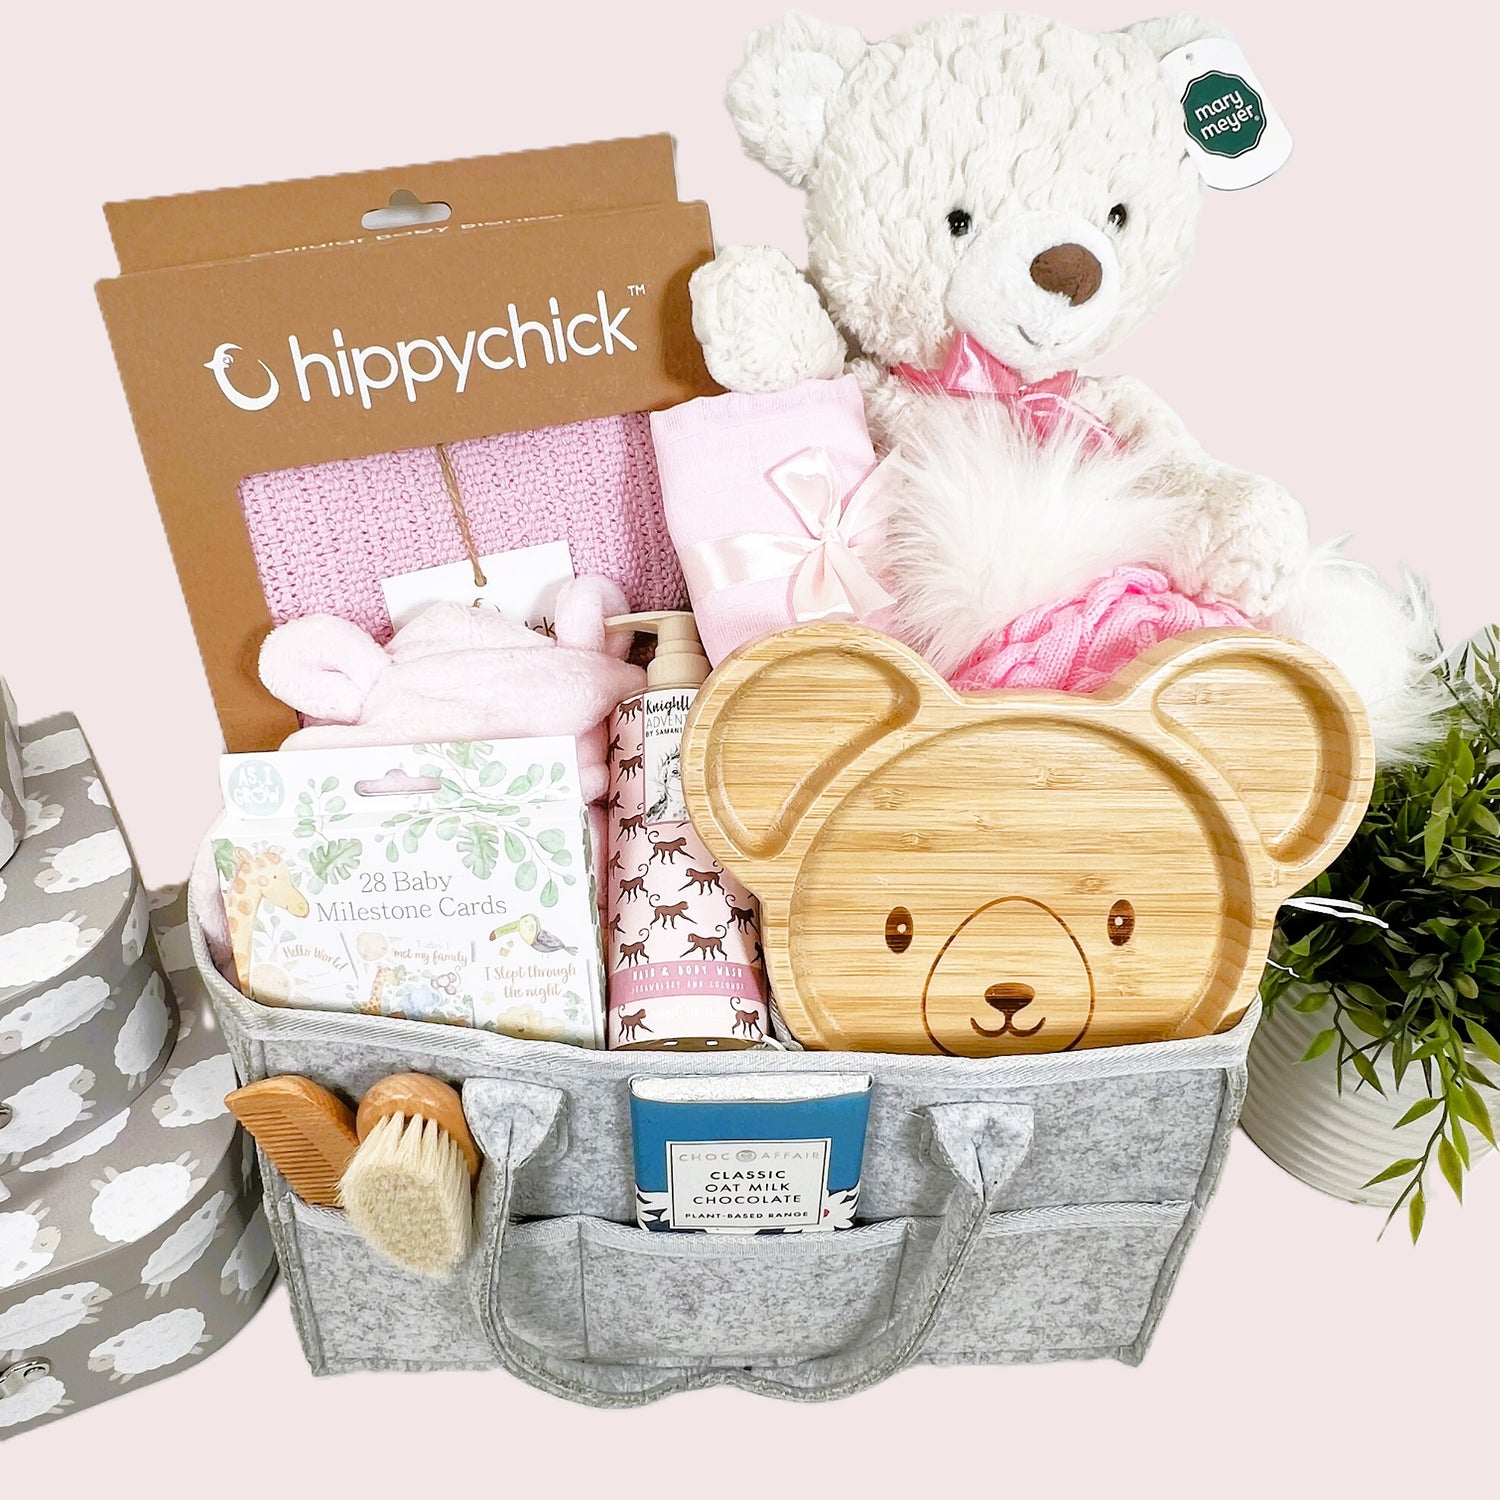 A grey nappy caddy baby hamper gift containing a Mary Meyer large Putty cream baer, a pink baby dressing gown , apink Hippychick cellular baby blankets, a bear bamboo baby plate, a wooden baby hairbrush and comb set a pink pom pom baby hat and various baby toiletries.